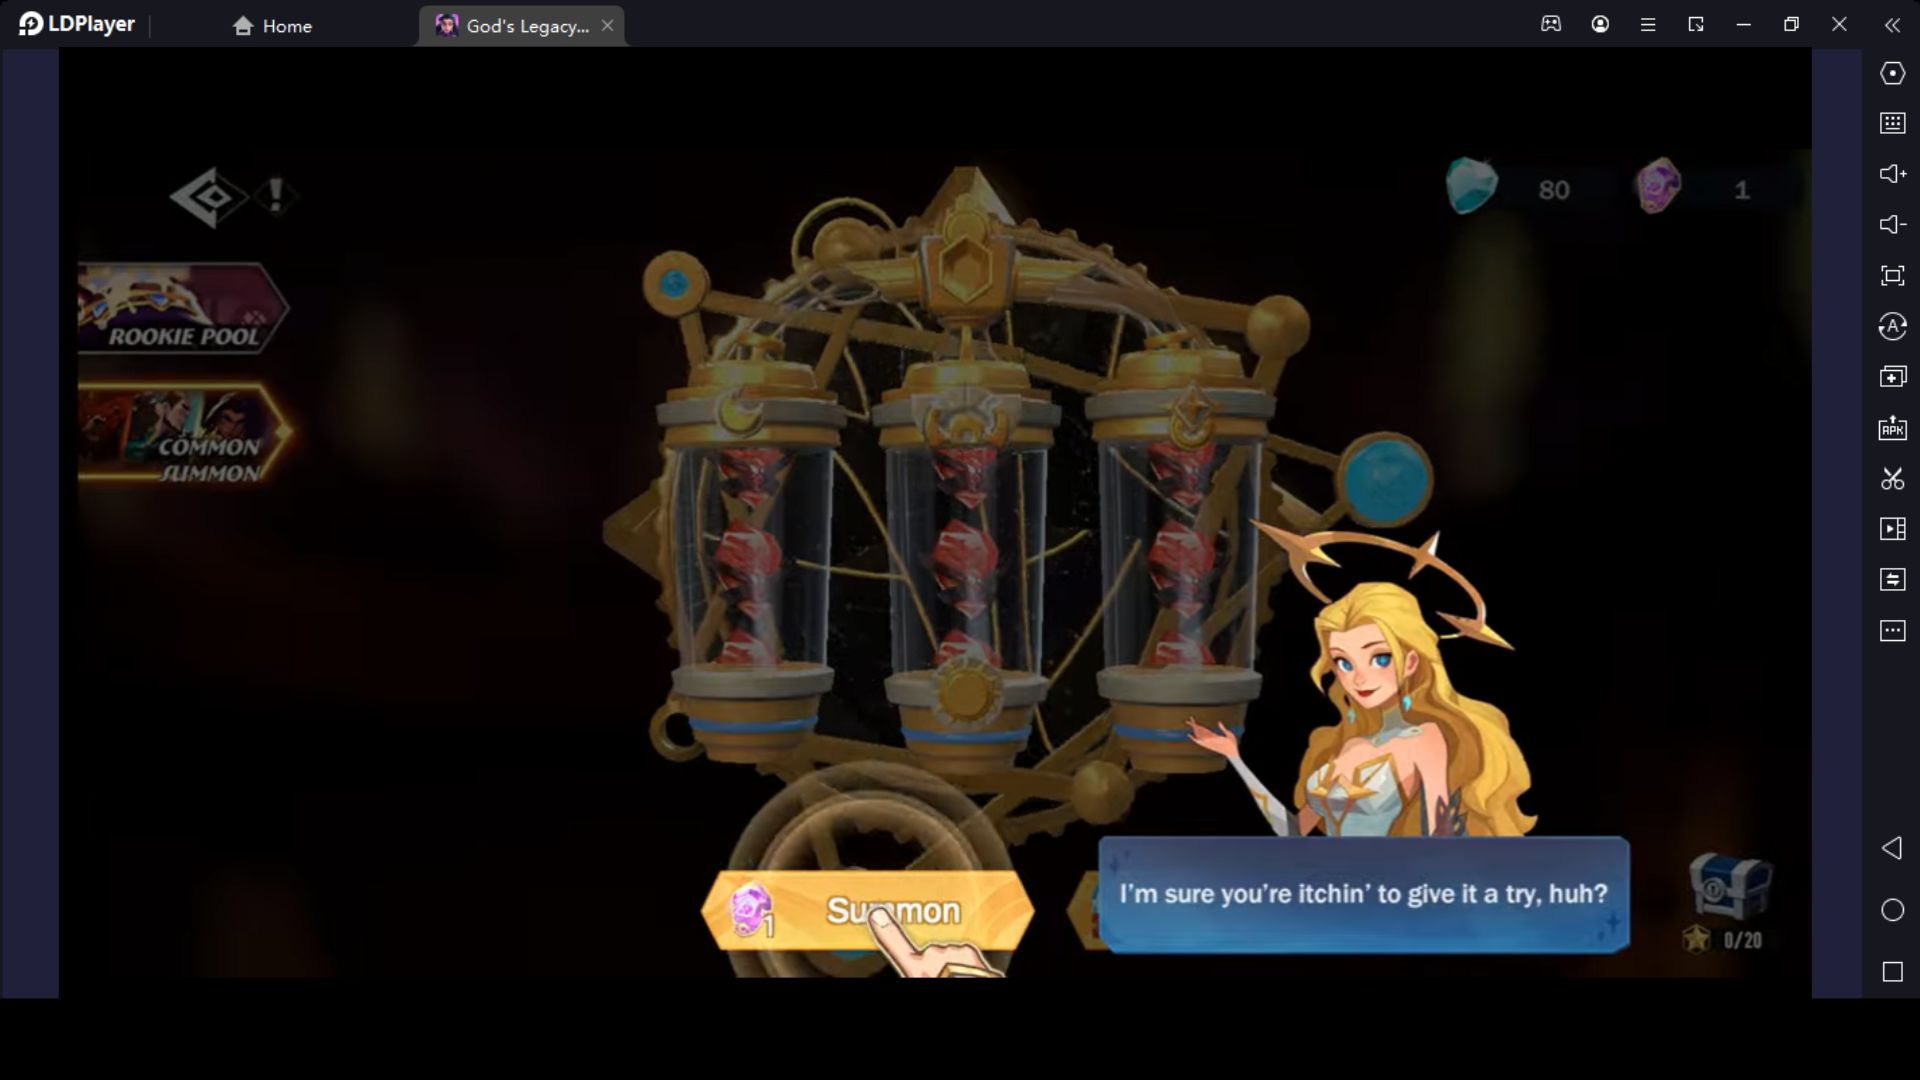 Summon Heroes For Your God's Legacy: Alchemist Gameplay